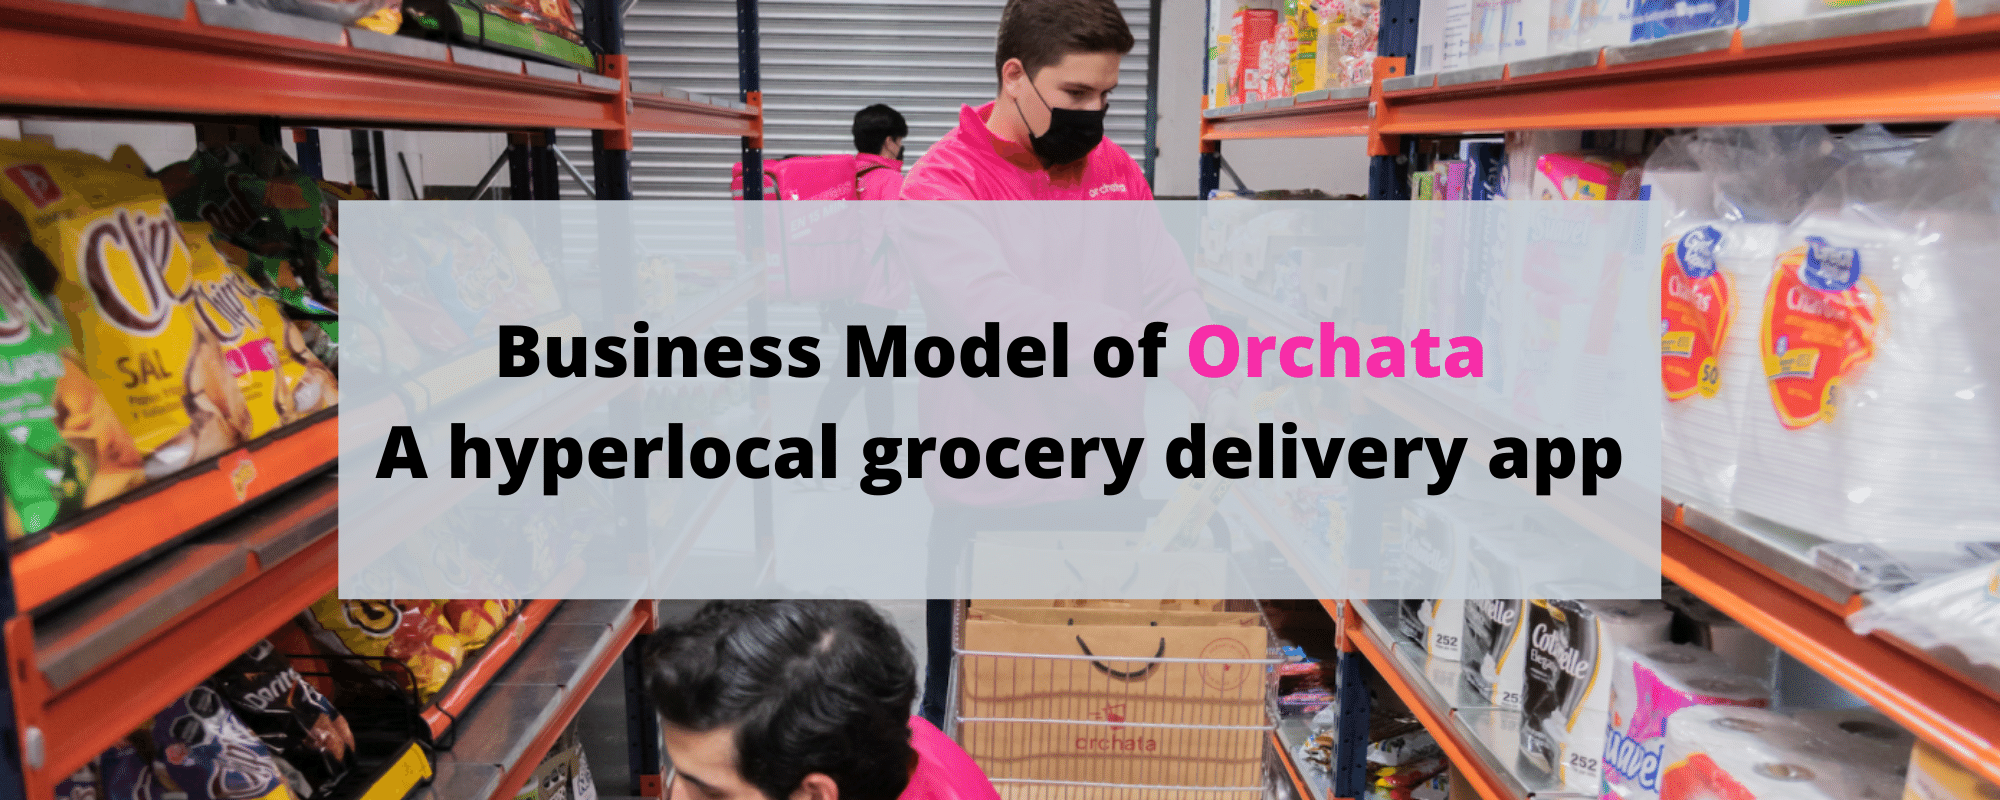 Business Model of Orchata